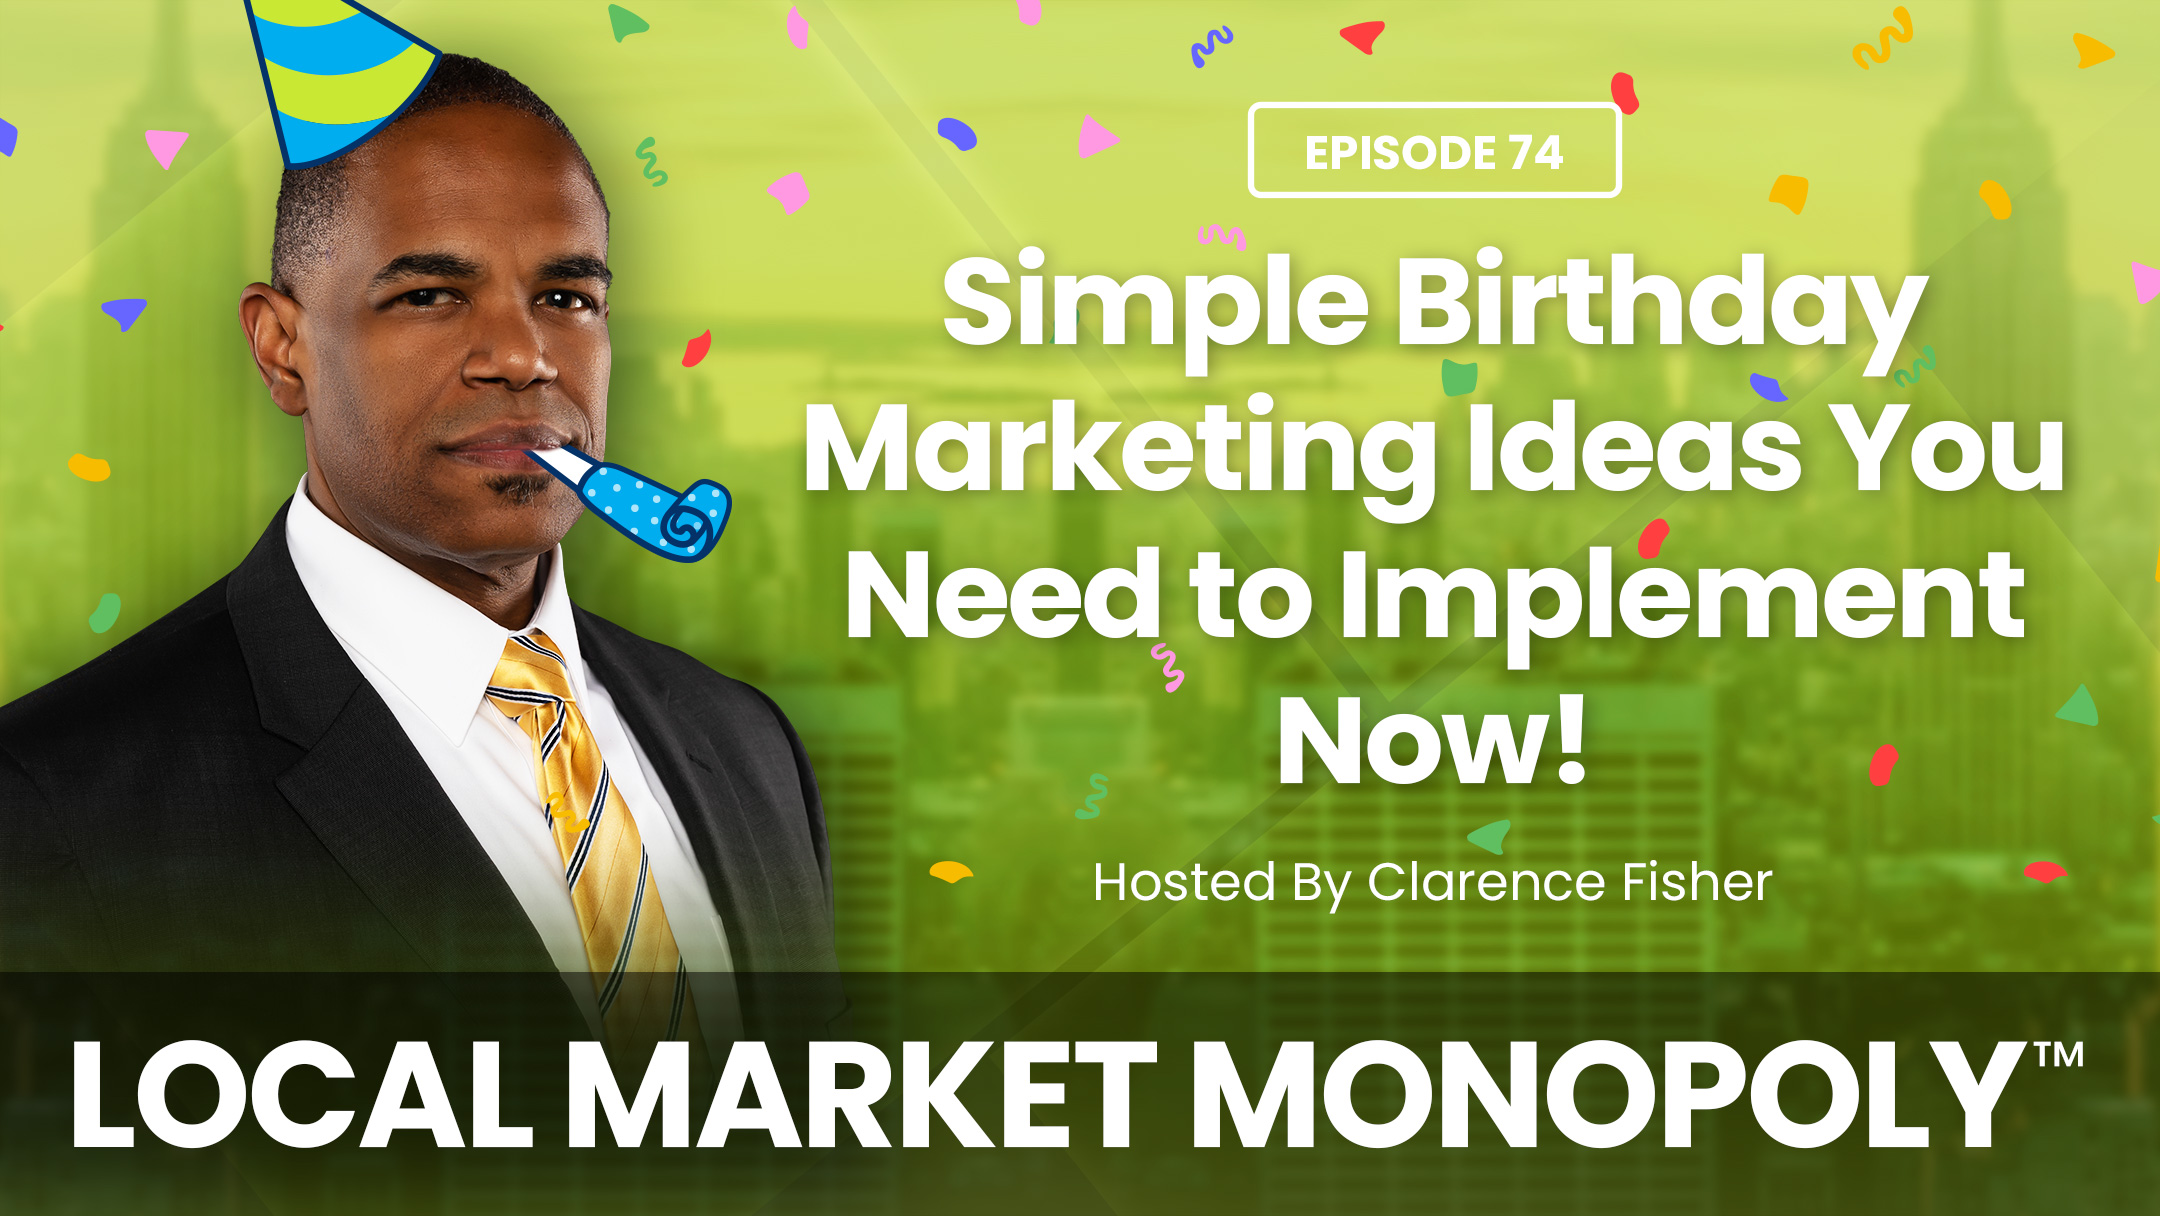 Simple Birthday Marketing Ideas You Need to Implement Now!